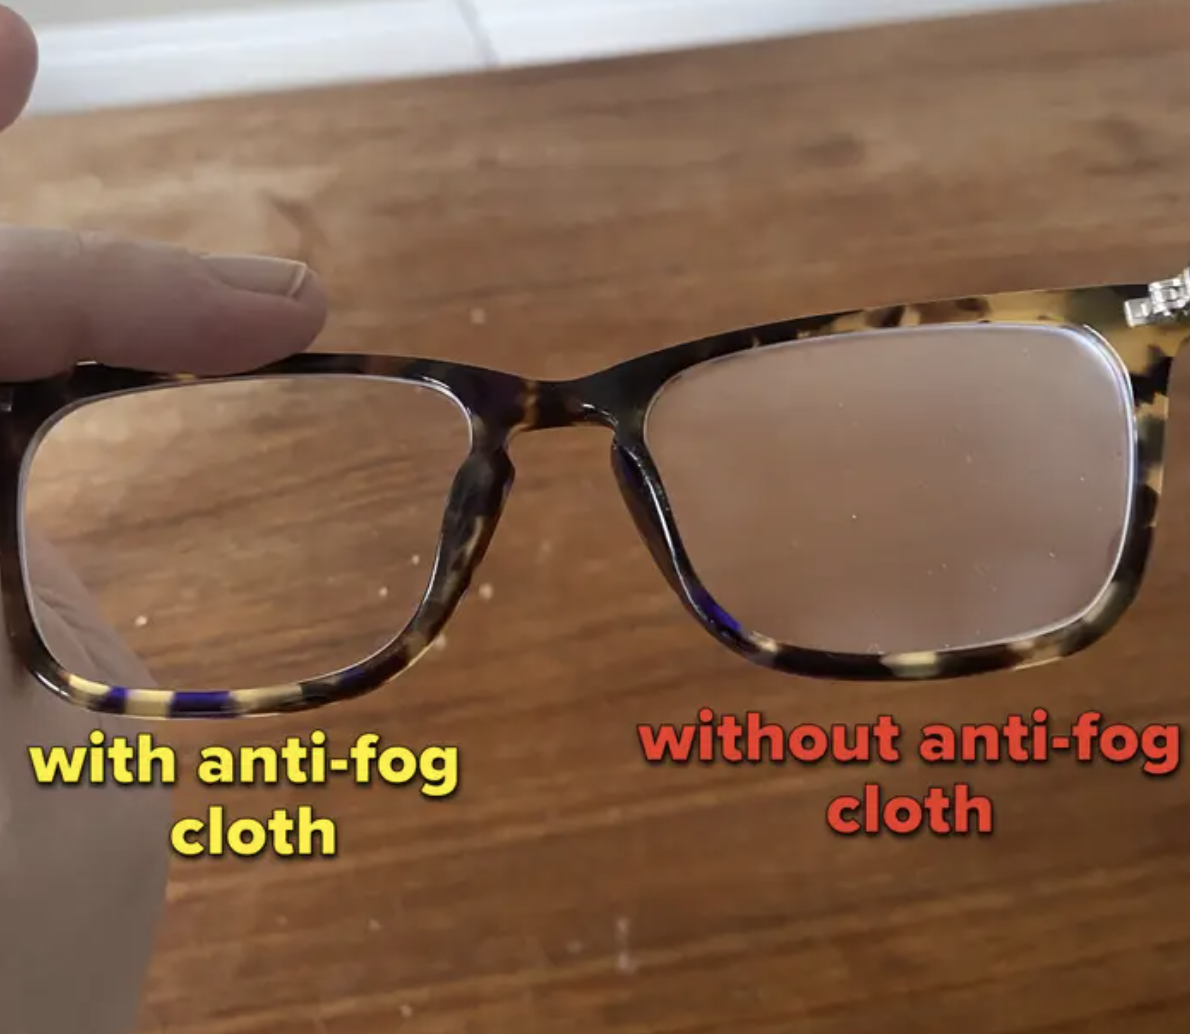 Someone holding a pair of glasses to compare anti-fog cloth effects on one lens and no fog cloth on the other